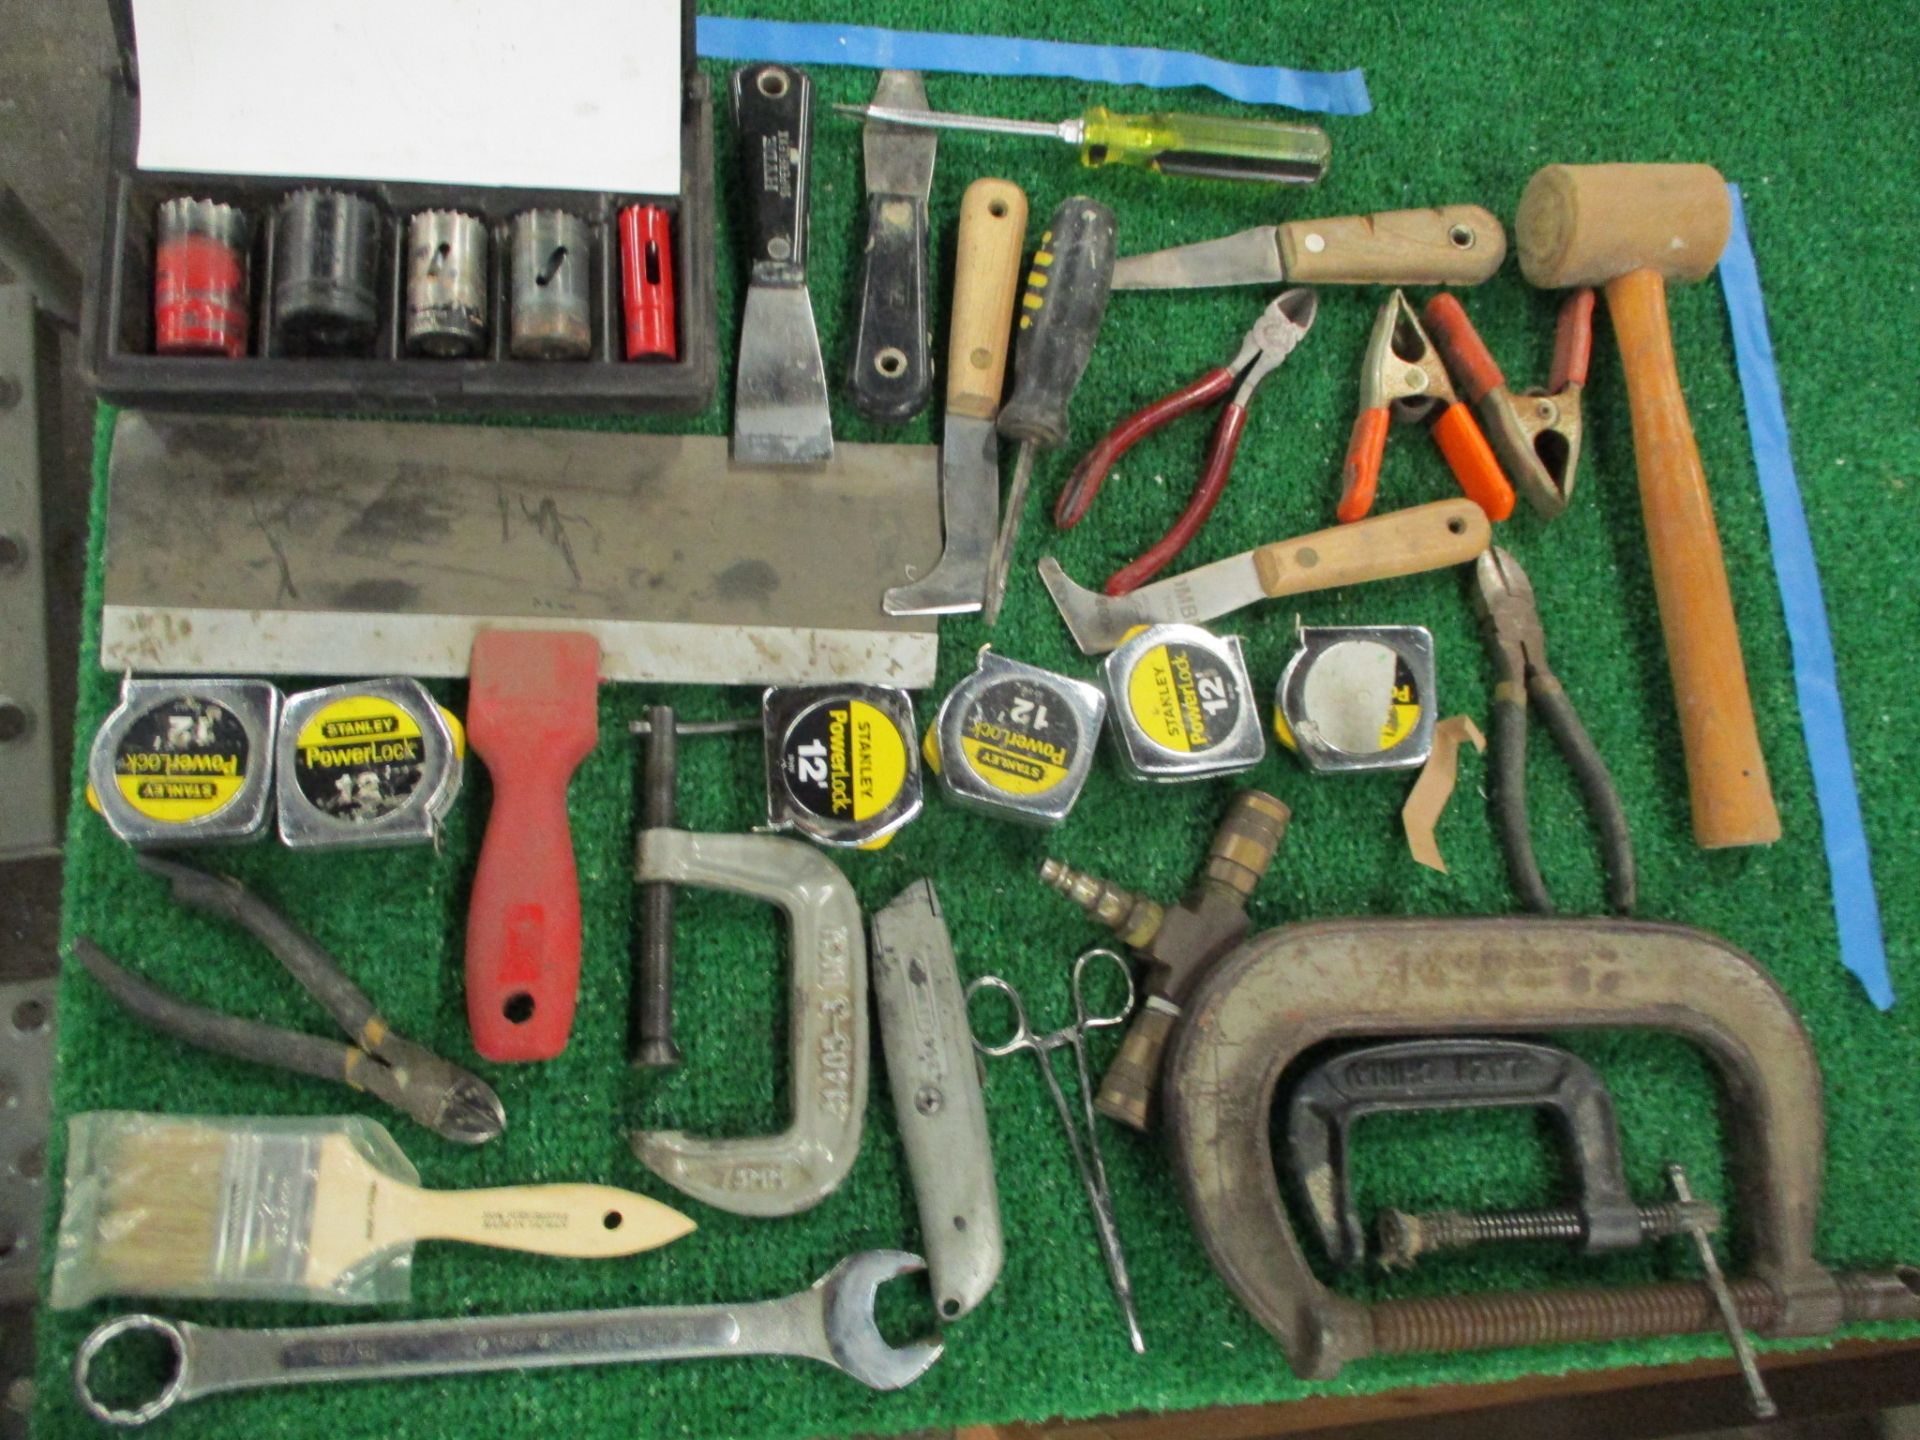 Assorted Hand Tools including Hammers, Screw Drivers, Putty Knives, Utility Knives, Pliers, Snips, T